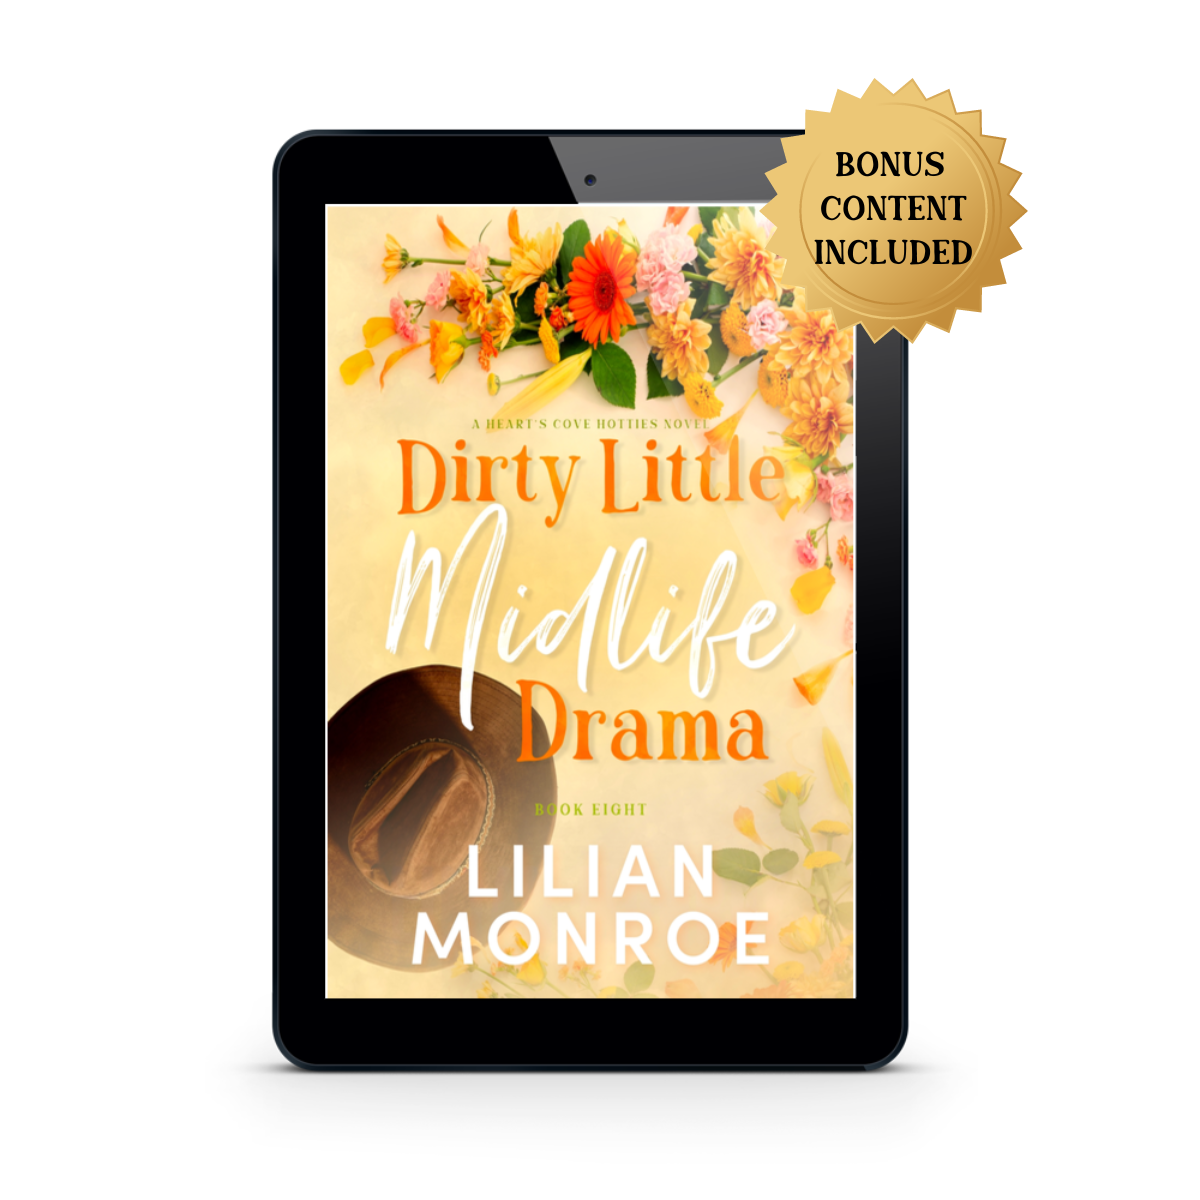 Heart's Cove Hotties Book 8: Dirty Little Midlife Drama